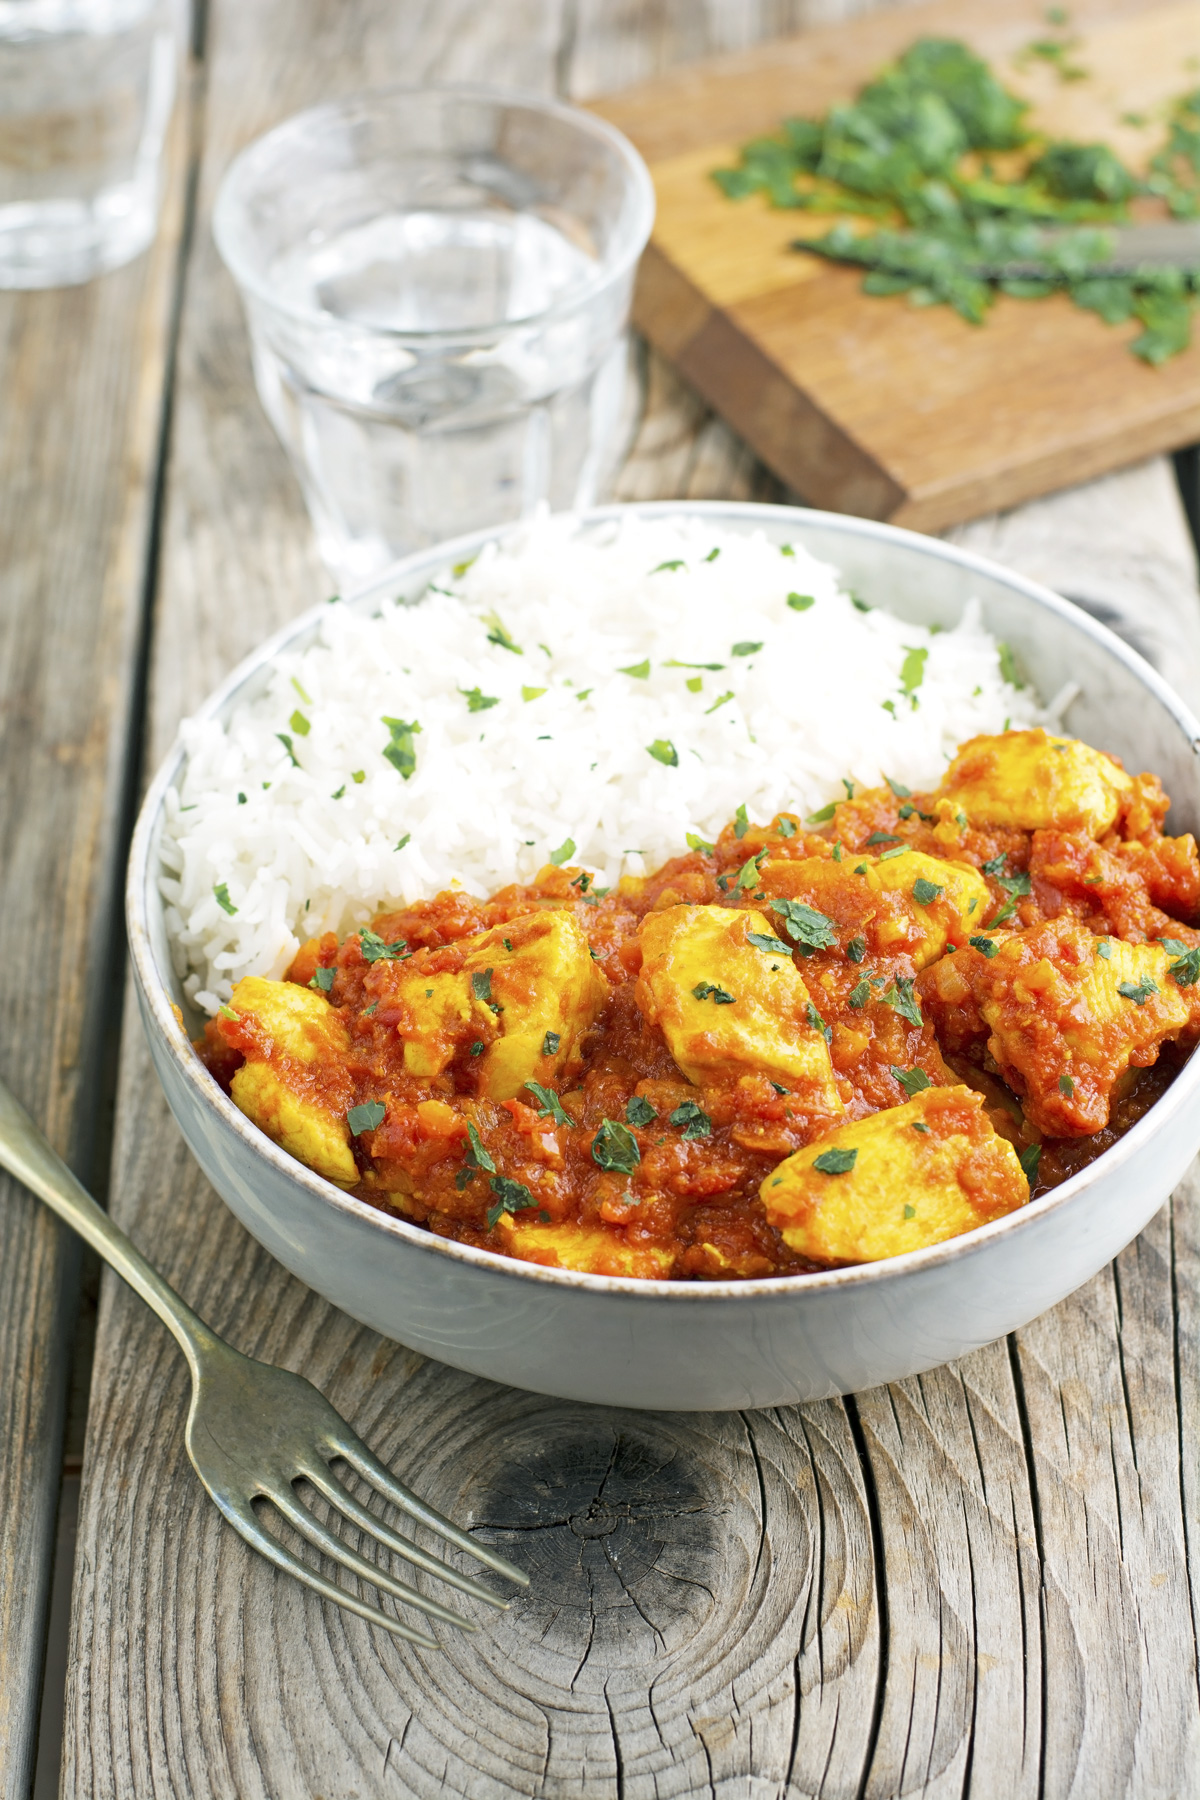 Everyday Meals - Curried Minced Chicken - Sparkles in the Everyday!